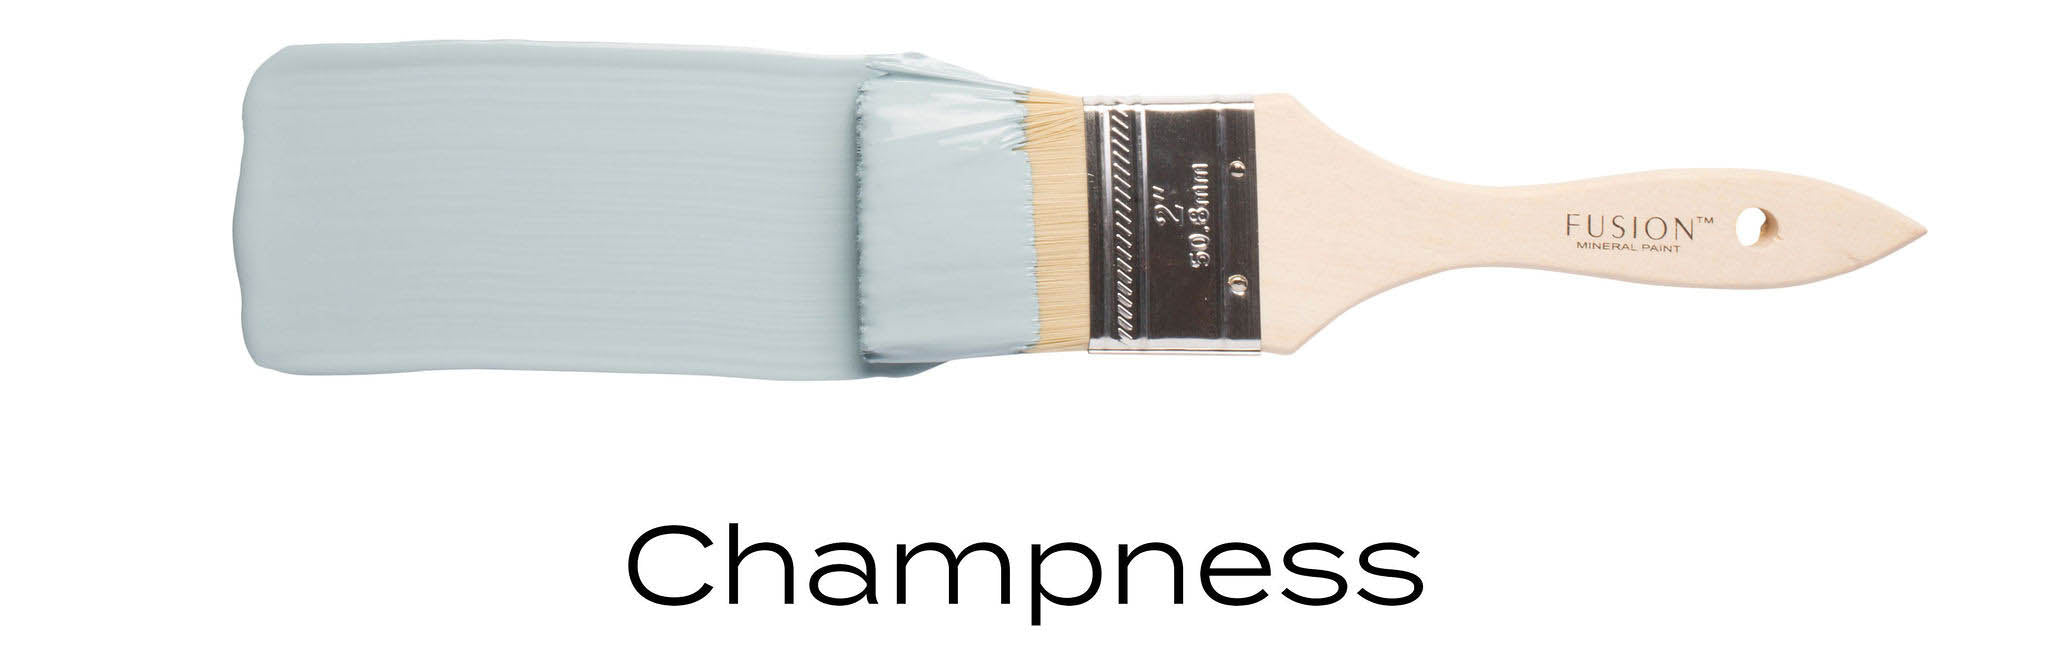 Champness fusion mineral paint example of light blue on paint brush